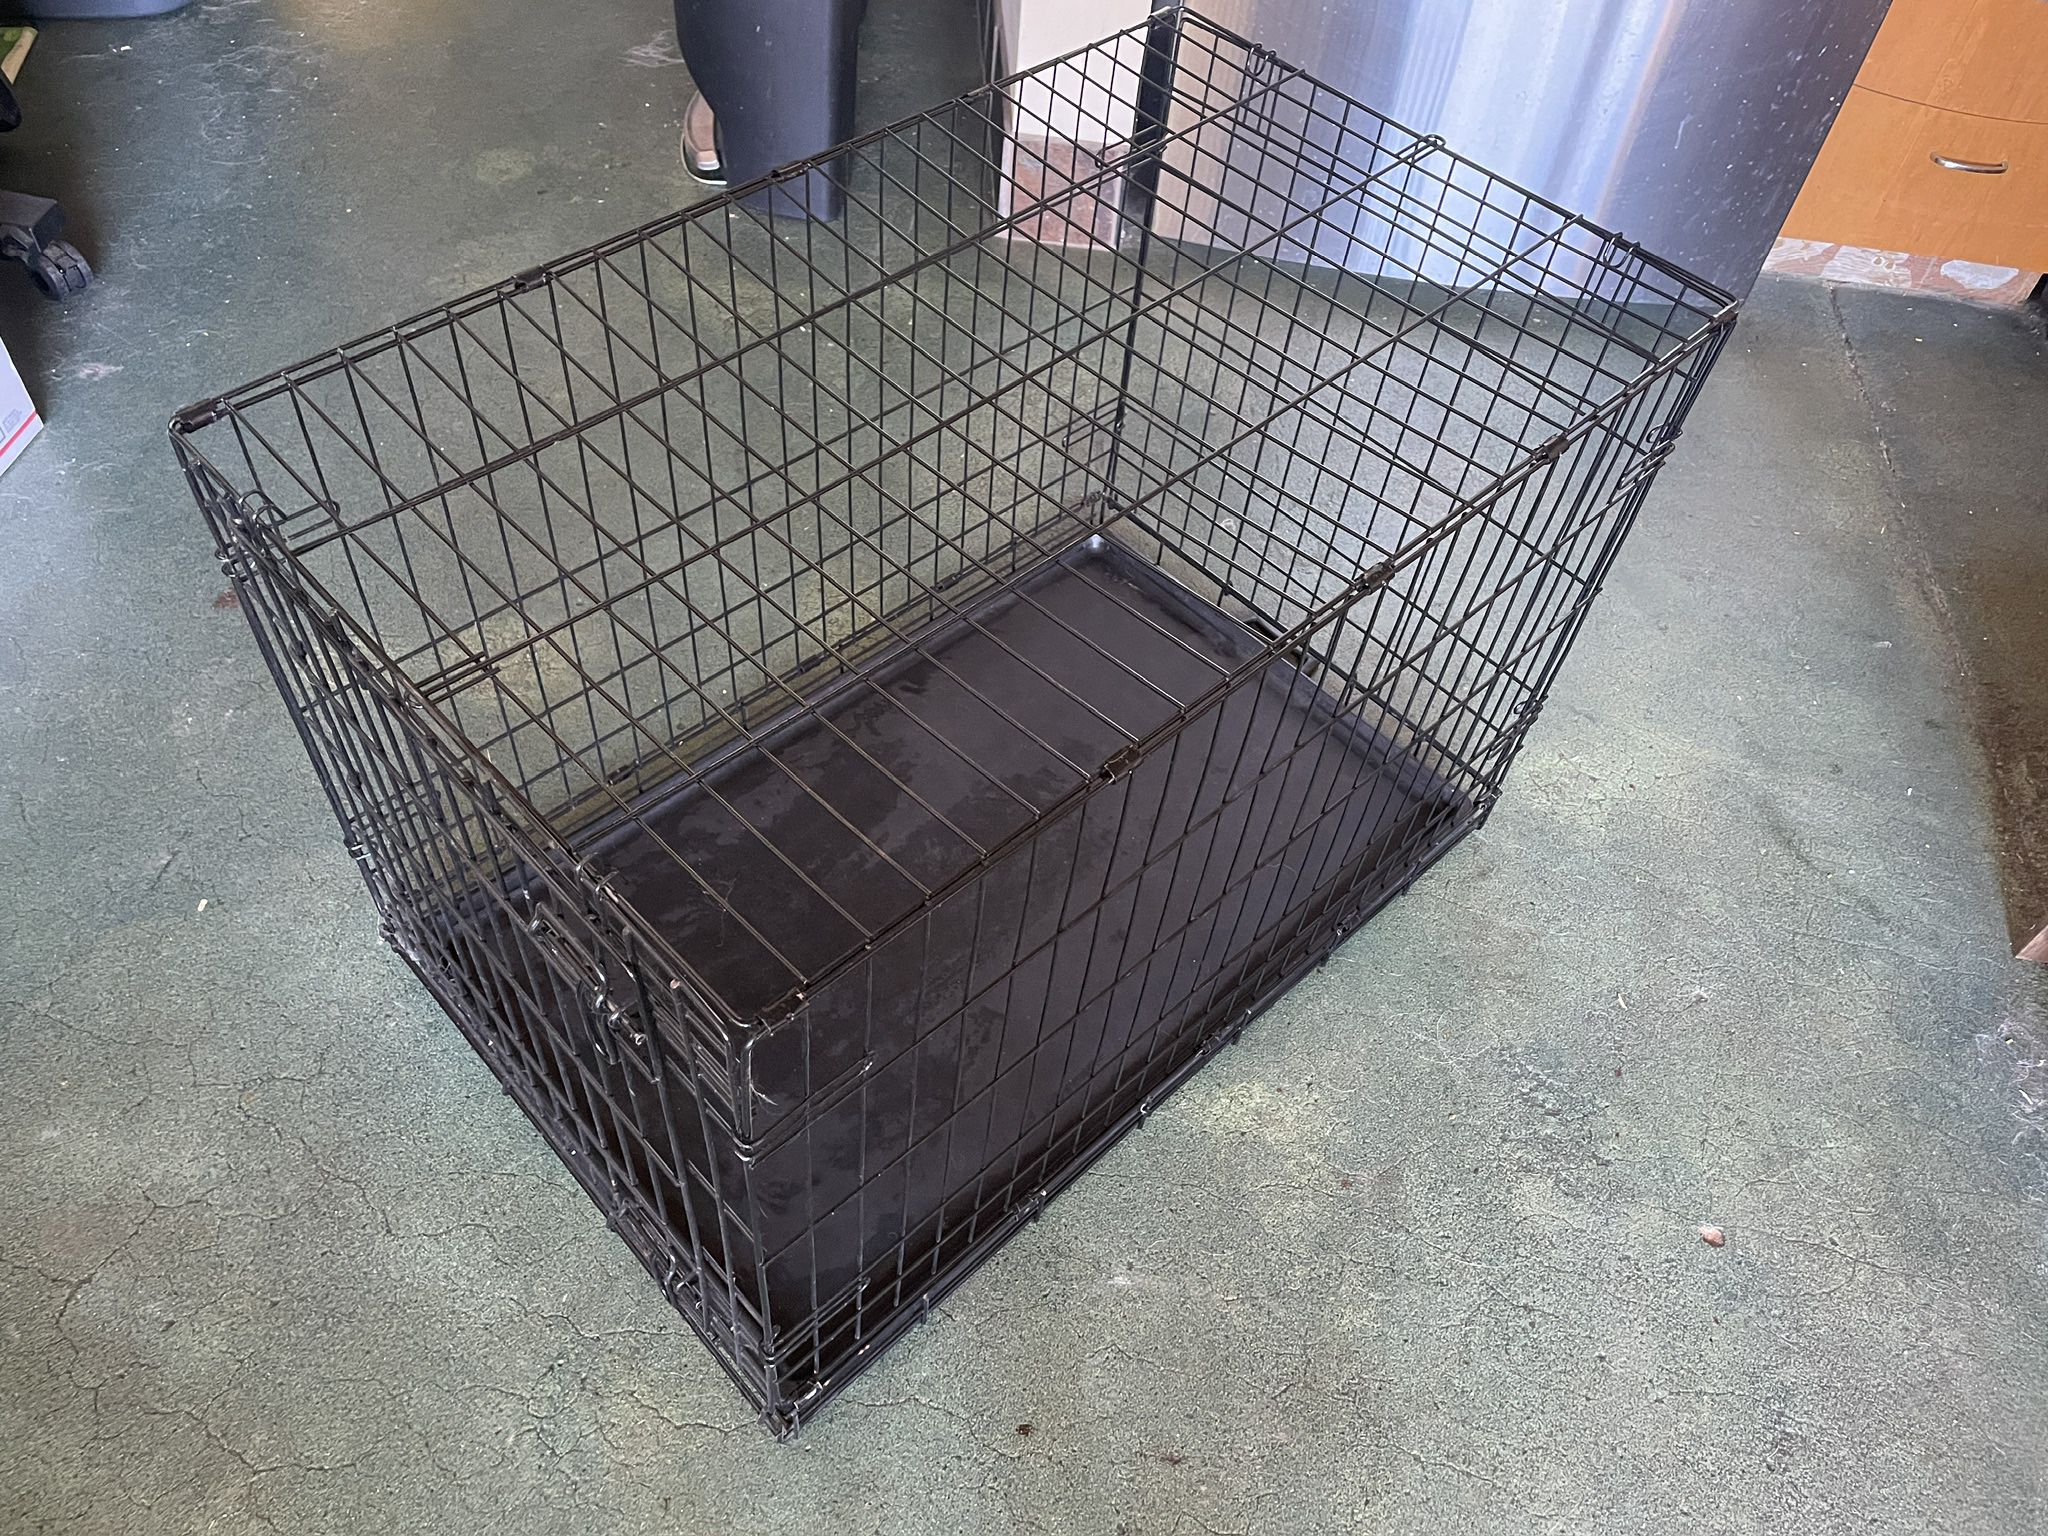 Large collapsable metal dog kennel